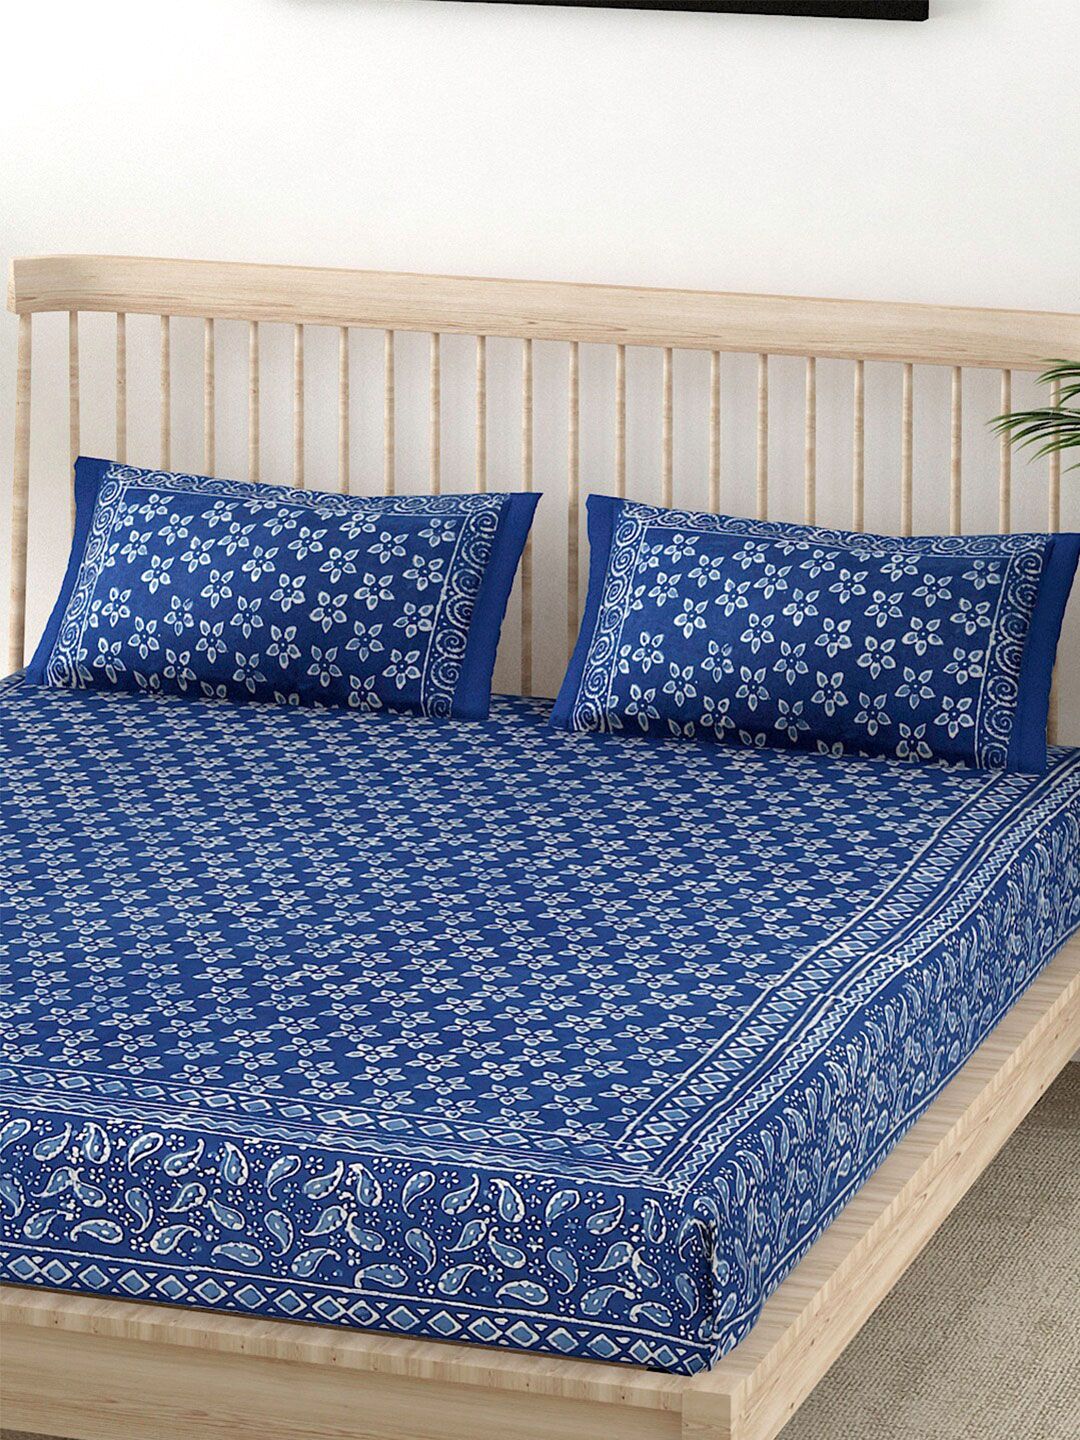 EK BY EKTA KAPOOR Navy Blue & White Floral 120 TC King Bedsheet with 2 Pillow Covers Price in India